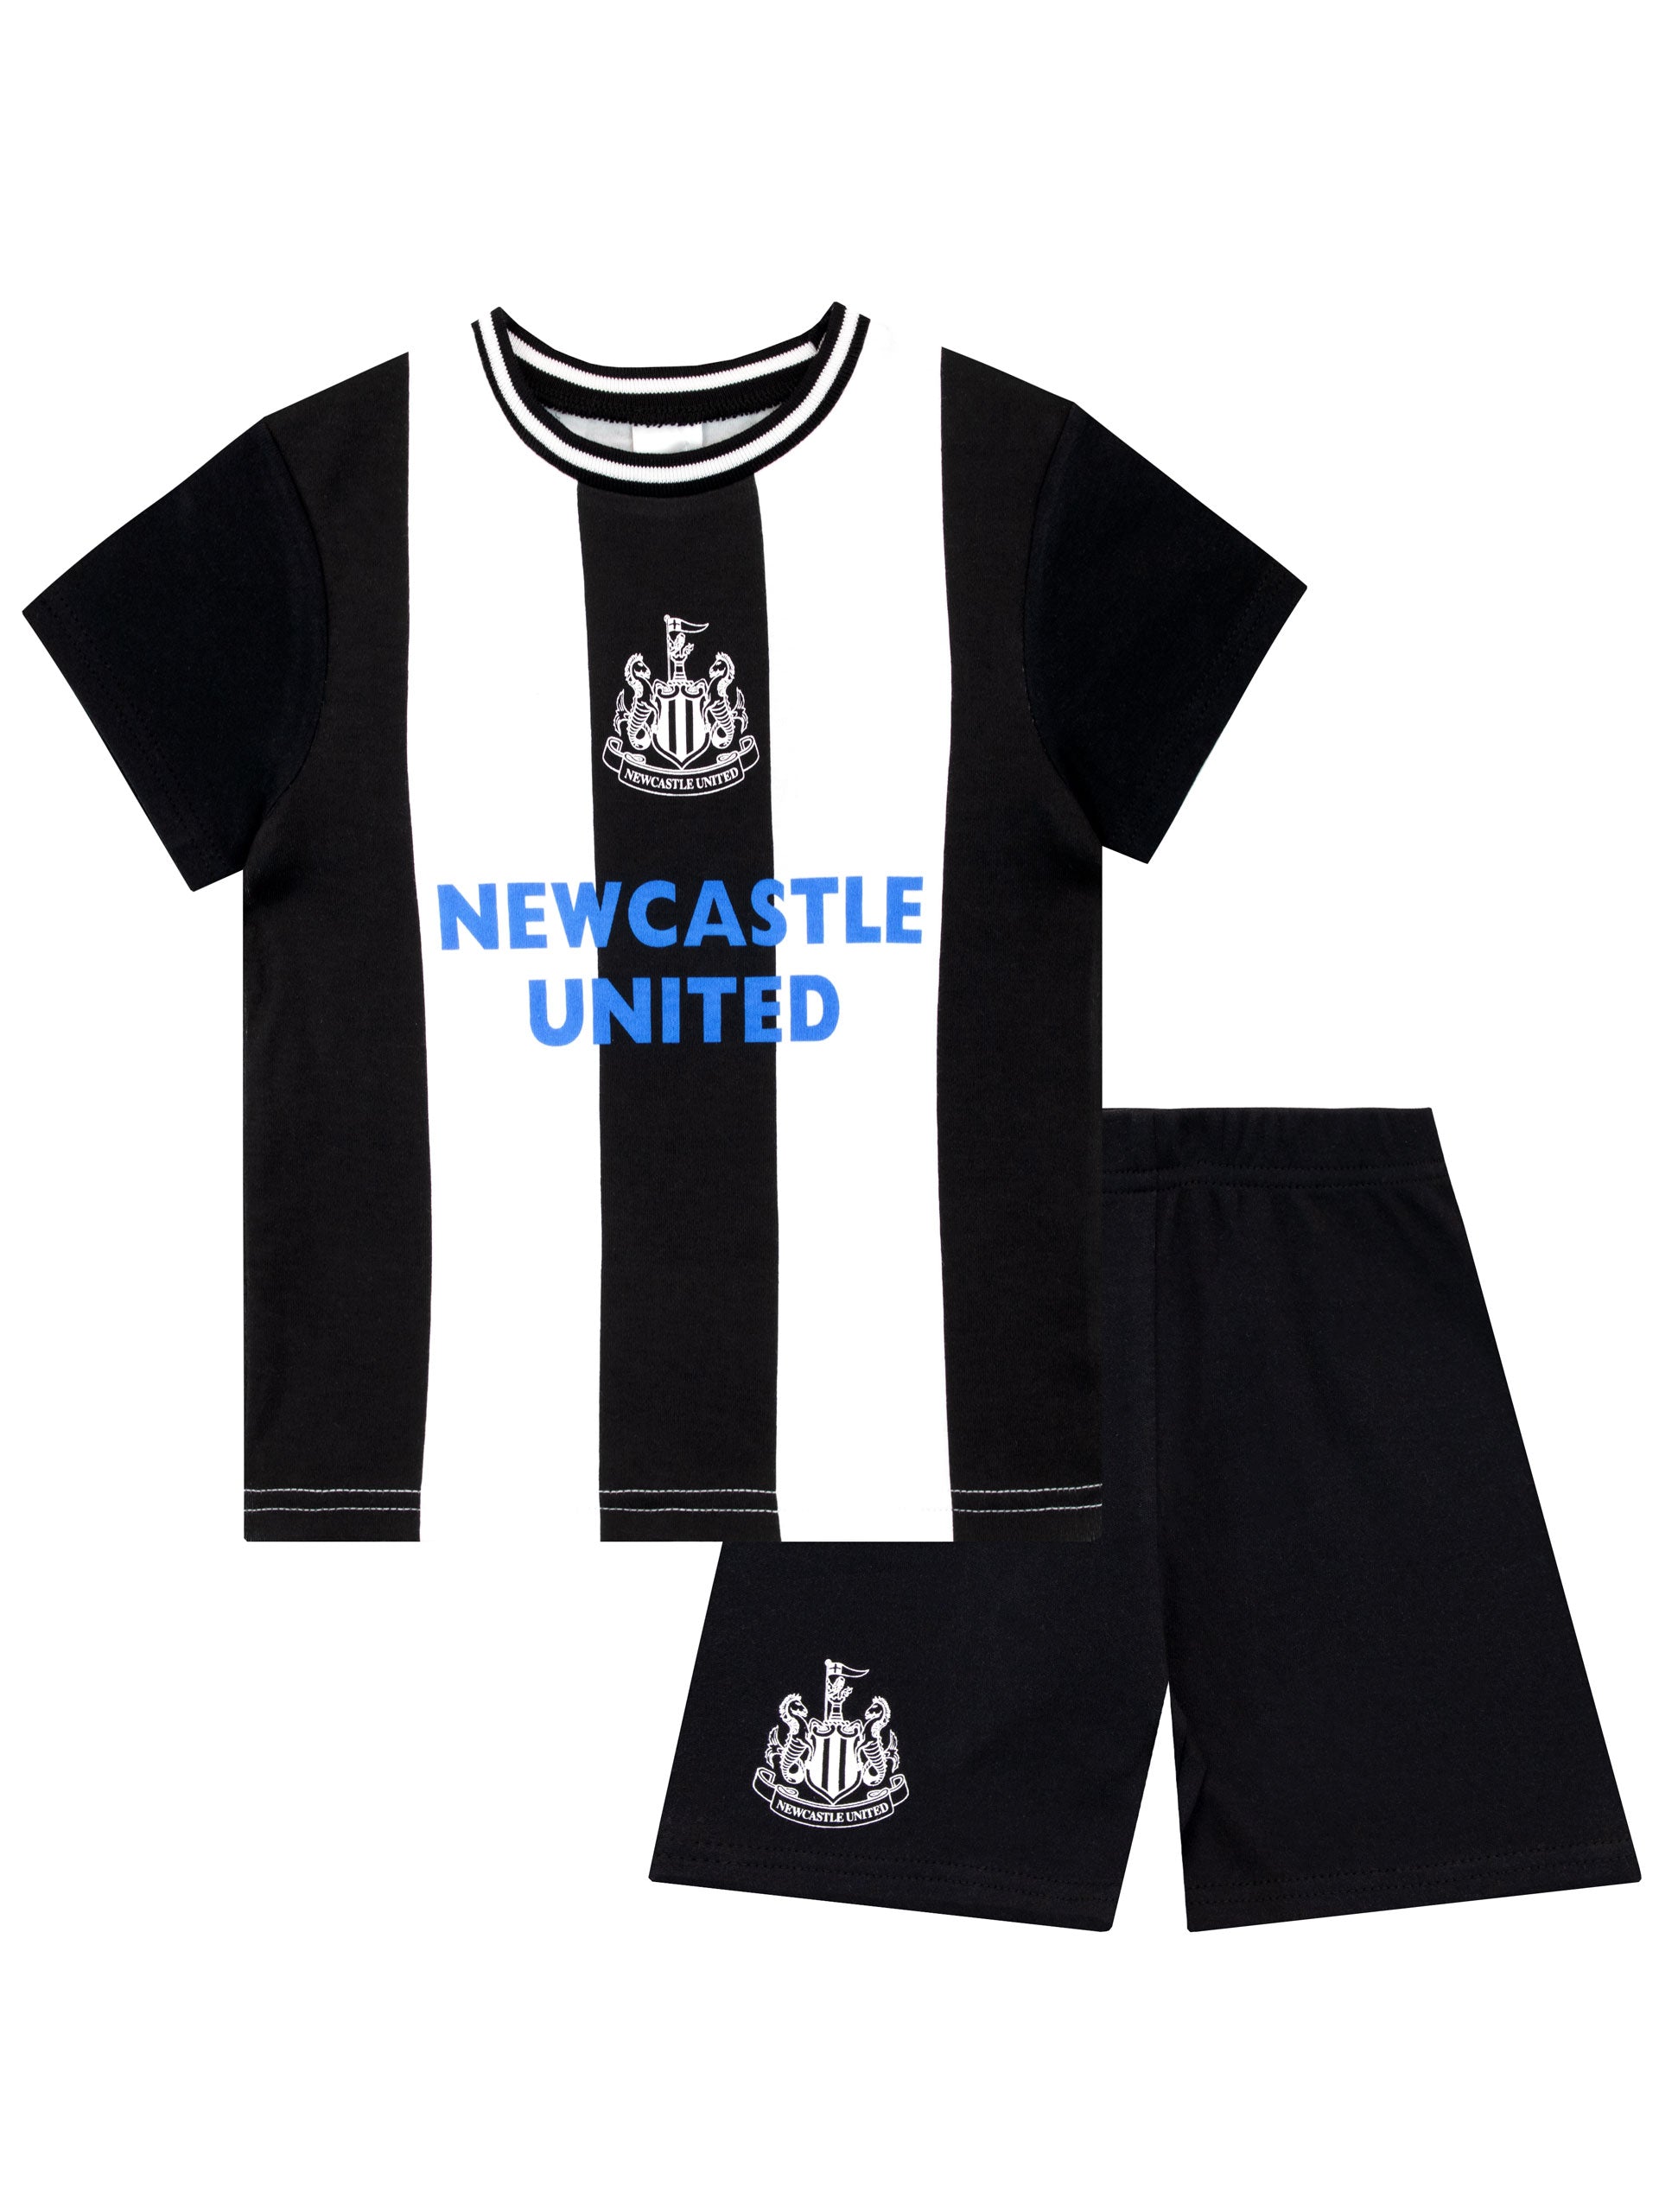 Newcastle United Shirts & Tops | Home & Away Kit | Castore